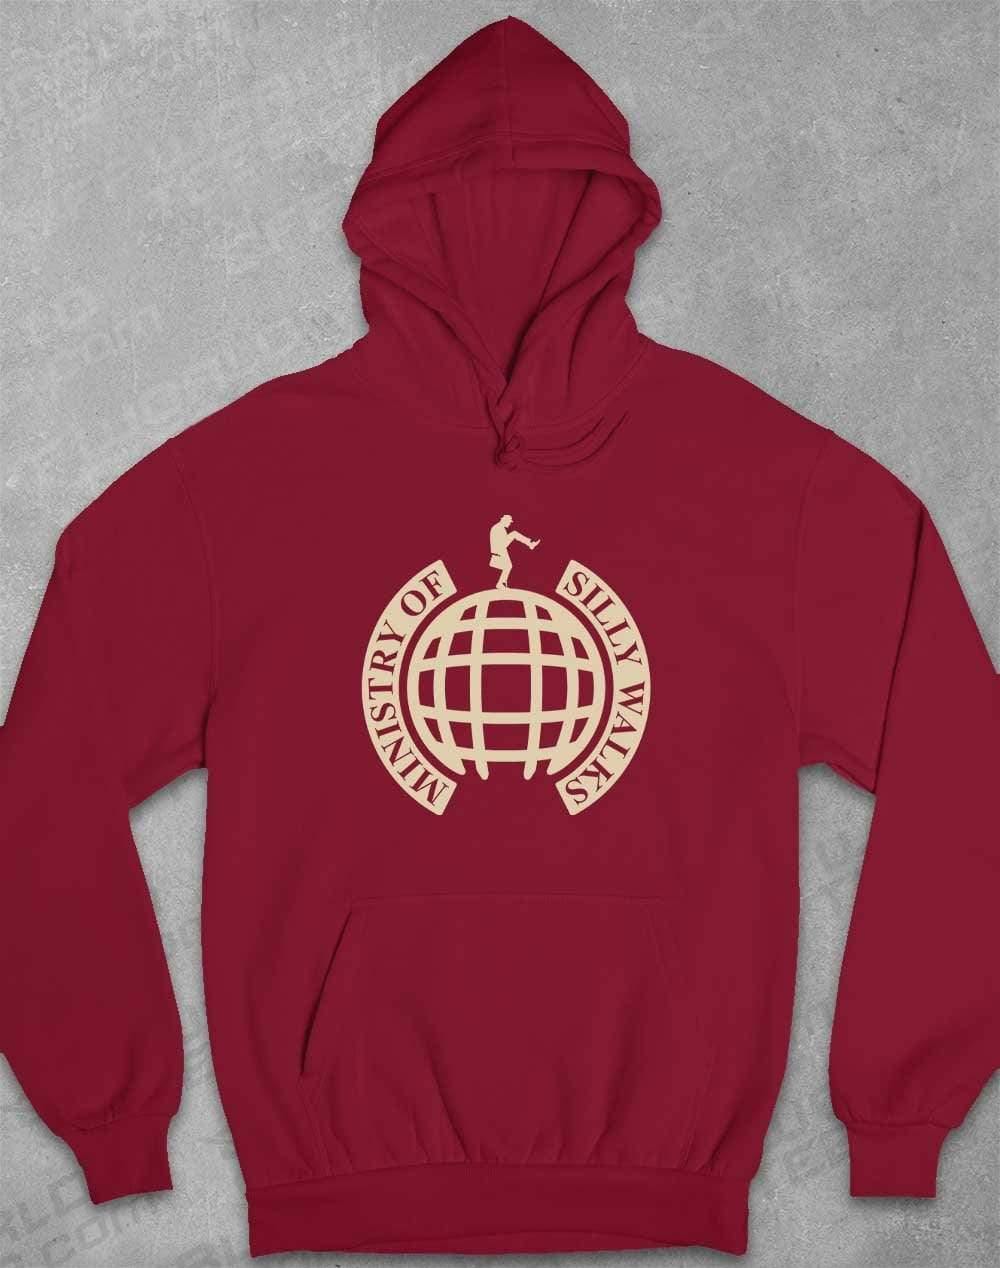 Ministry of Silly Walks Hoodie XS / Burgundy  - Off World Tees